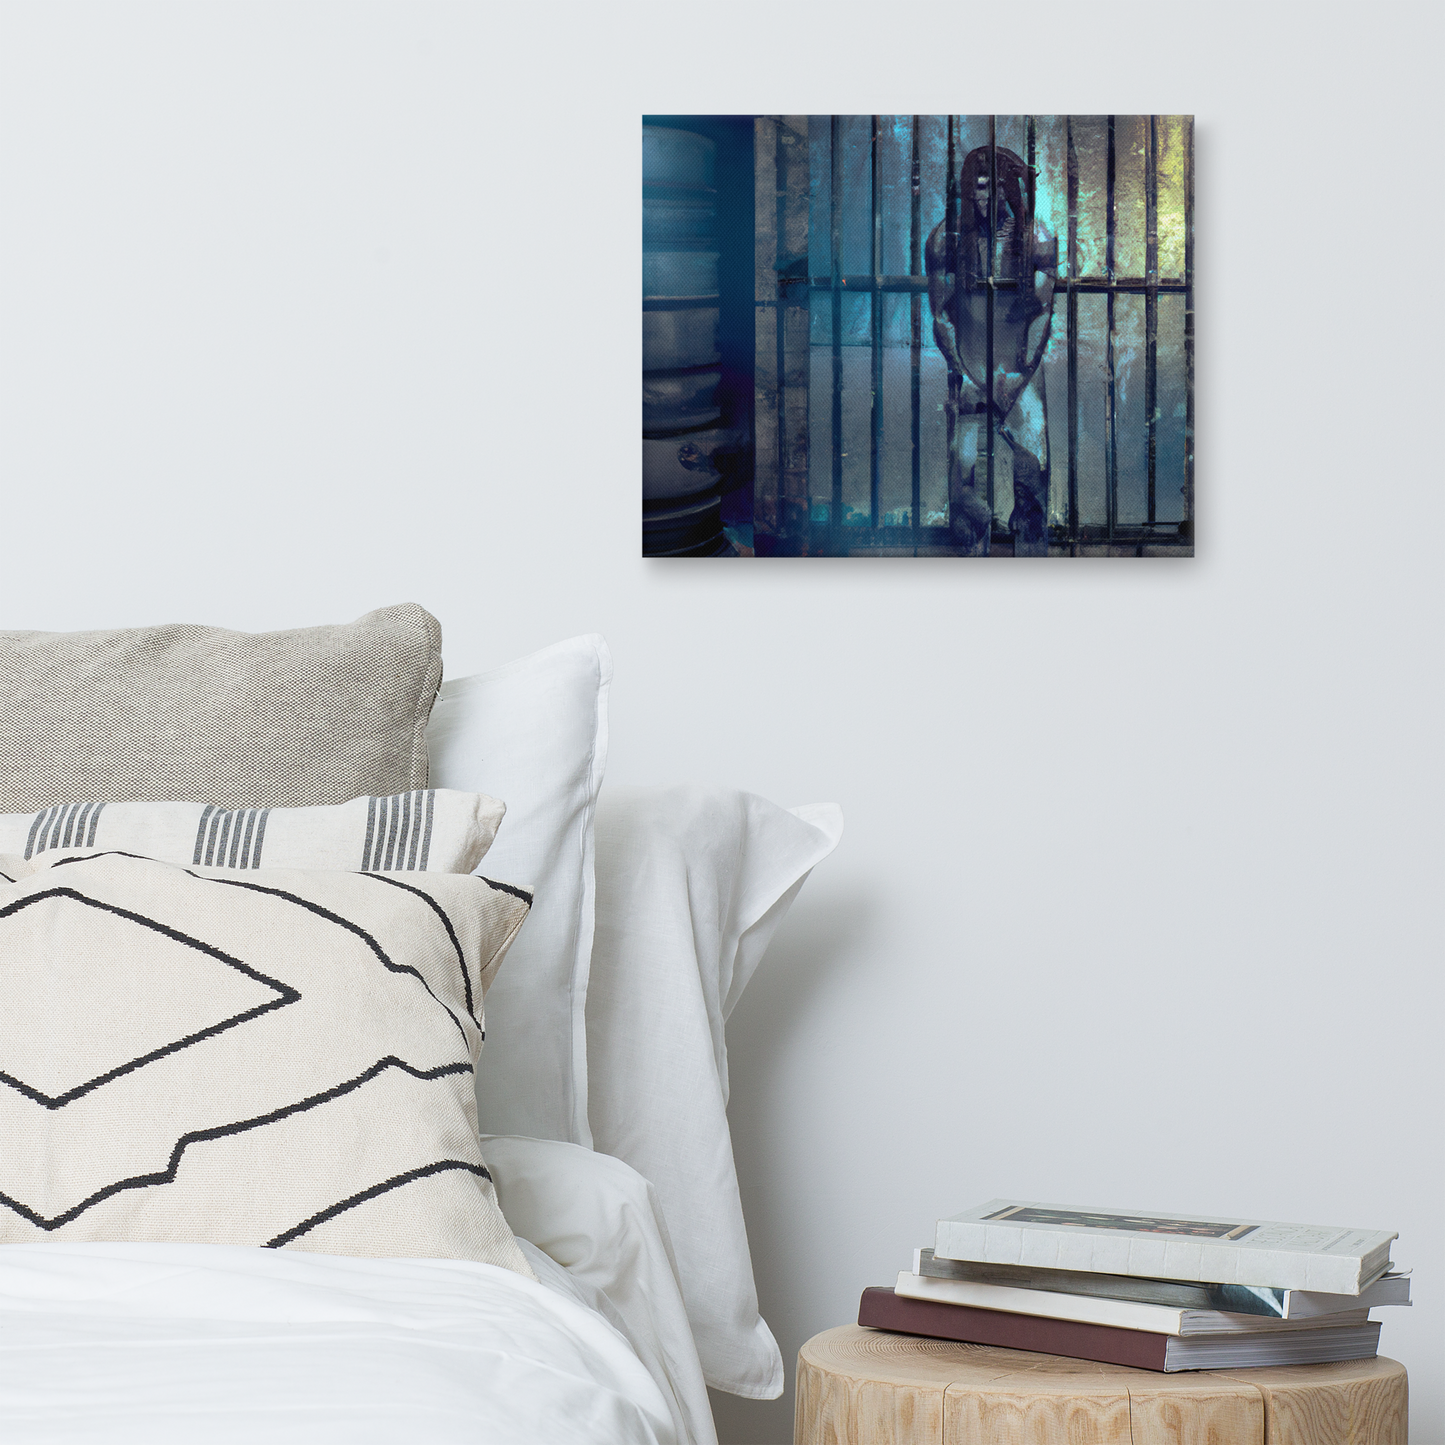 SOULED OUT "Cages 1" Canvas